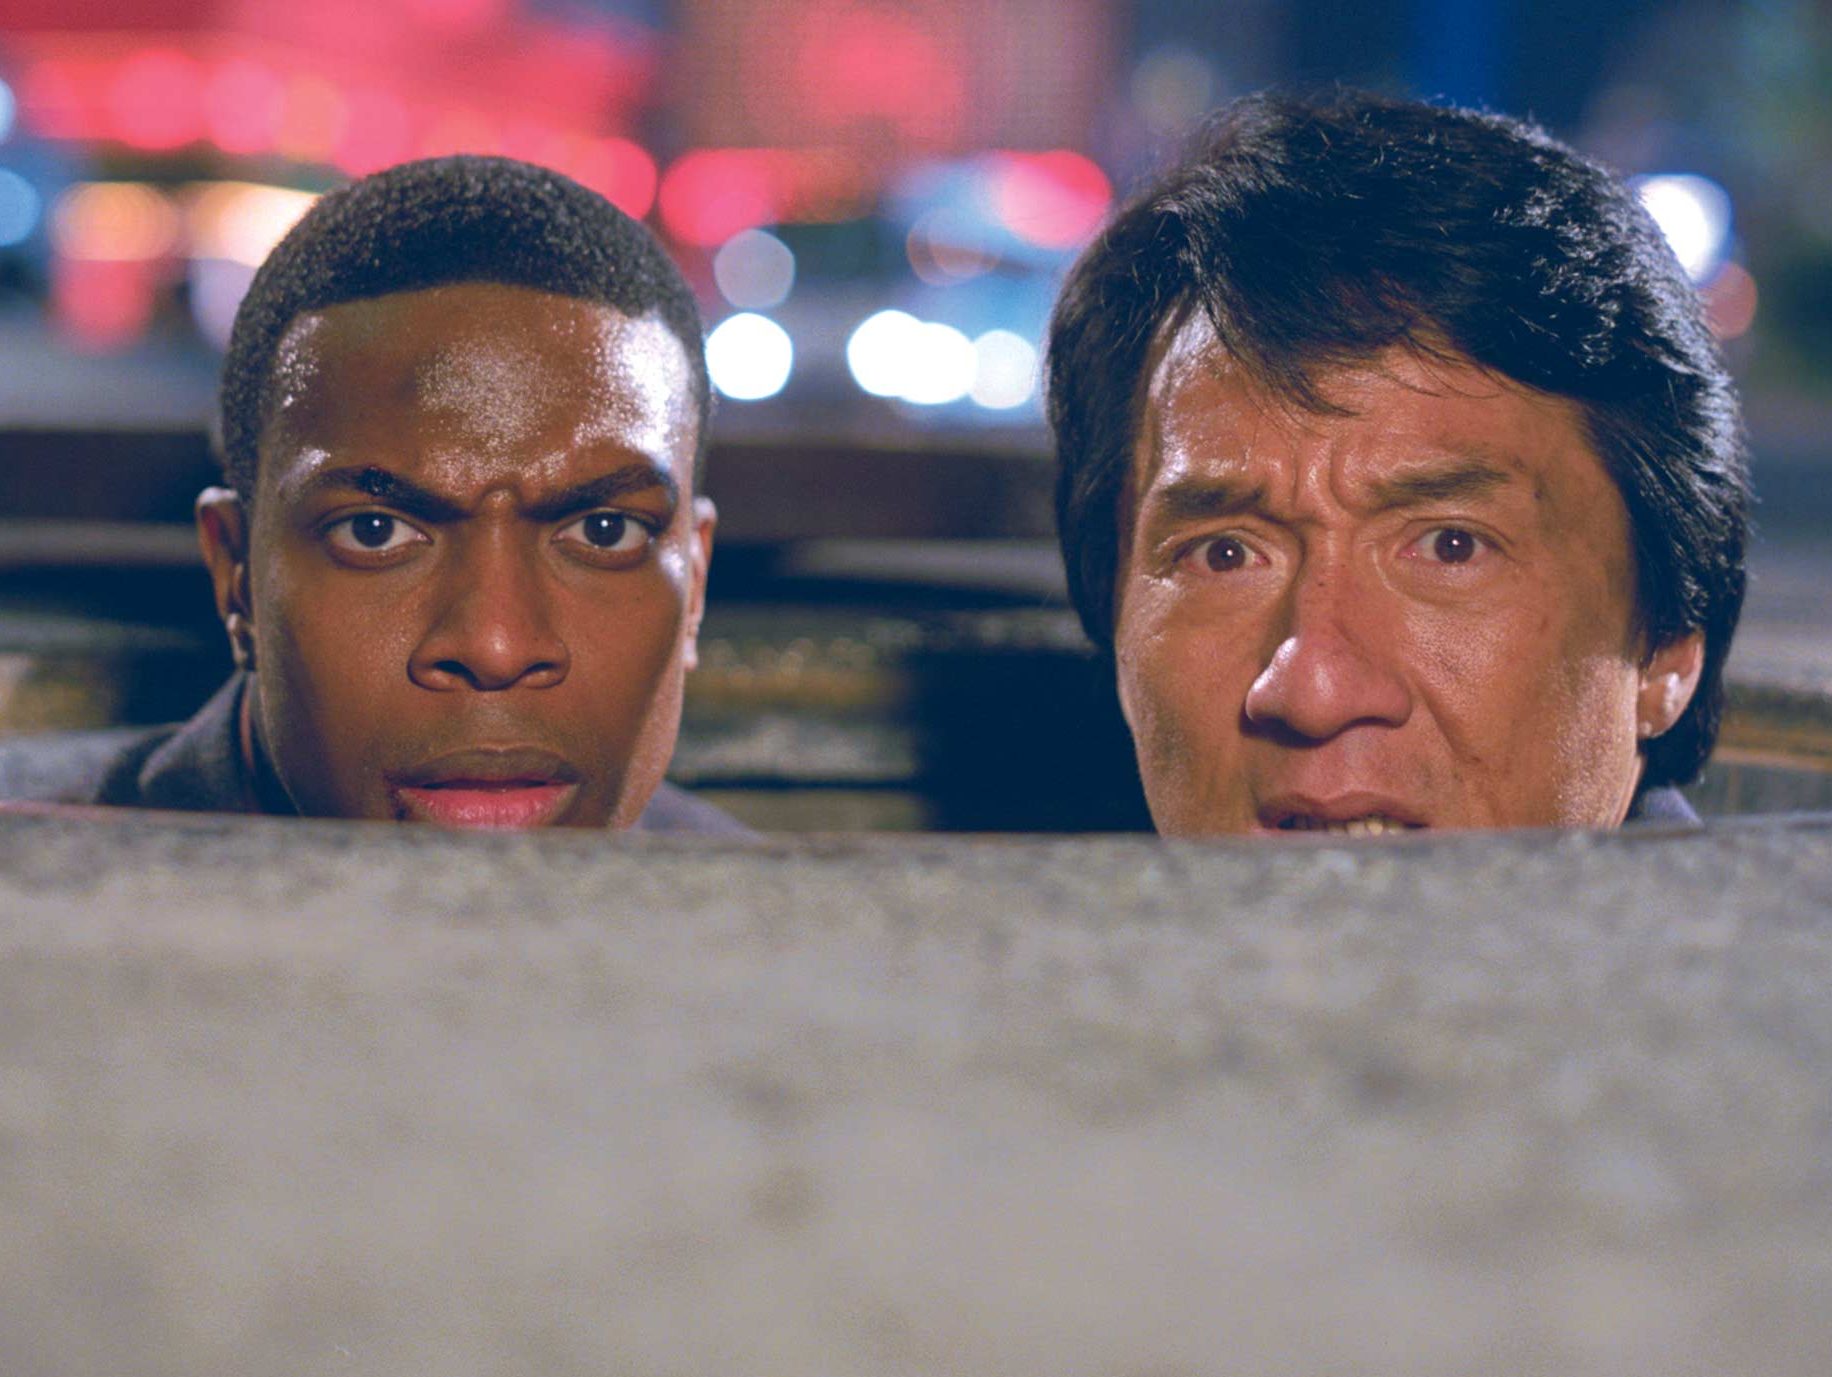 rush hour - Next Best Picture